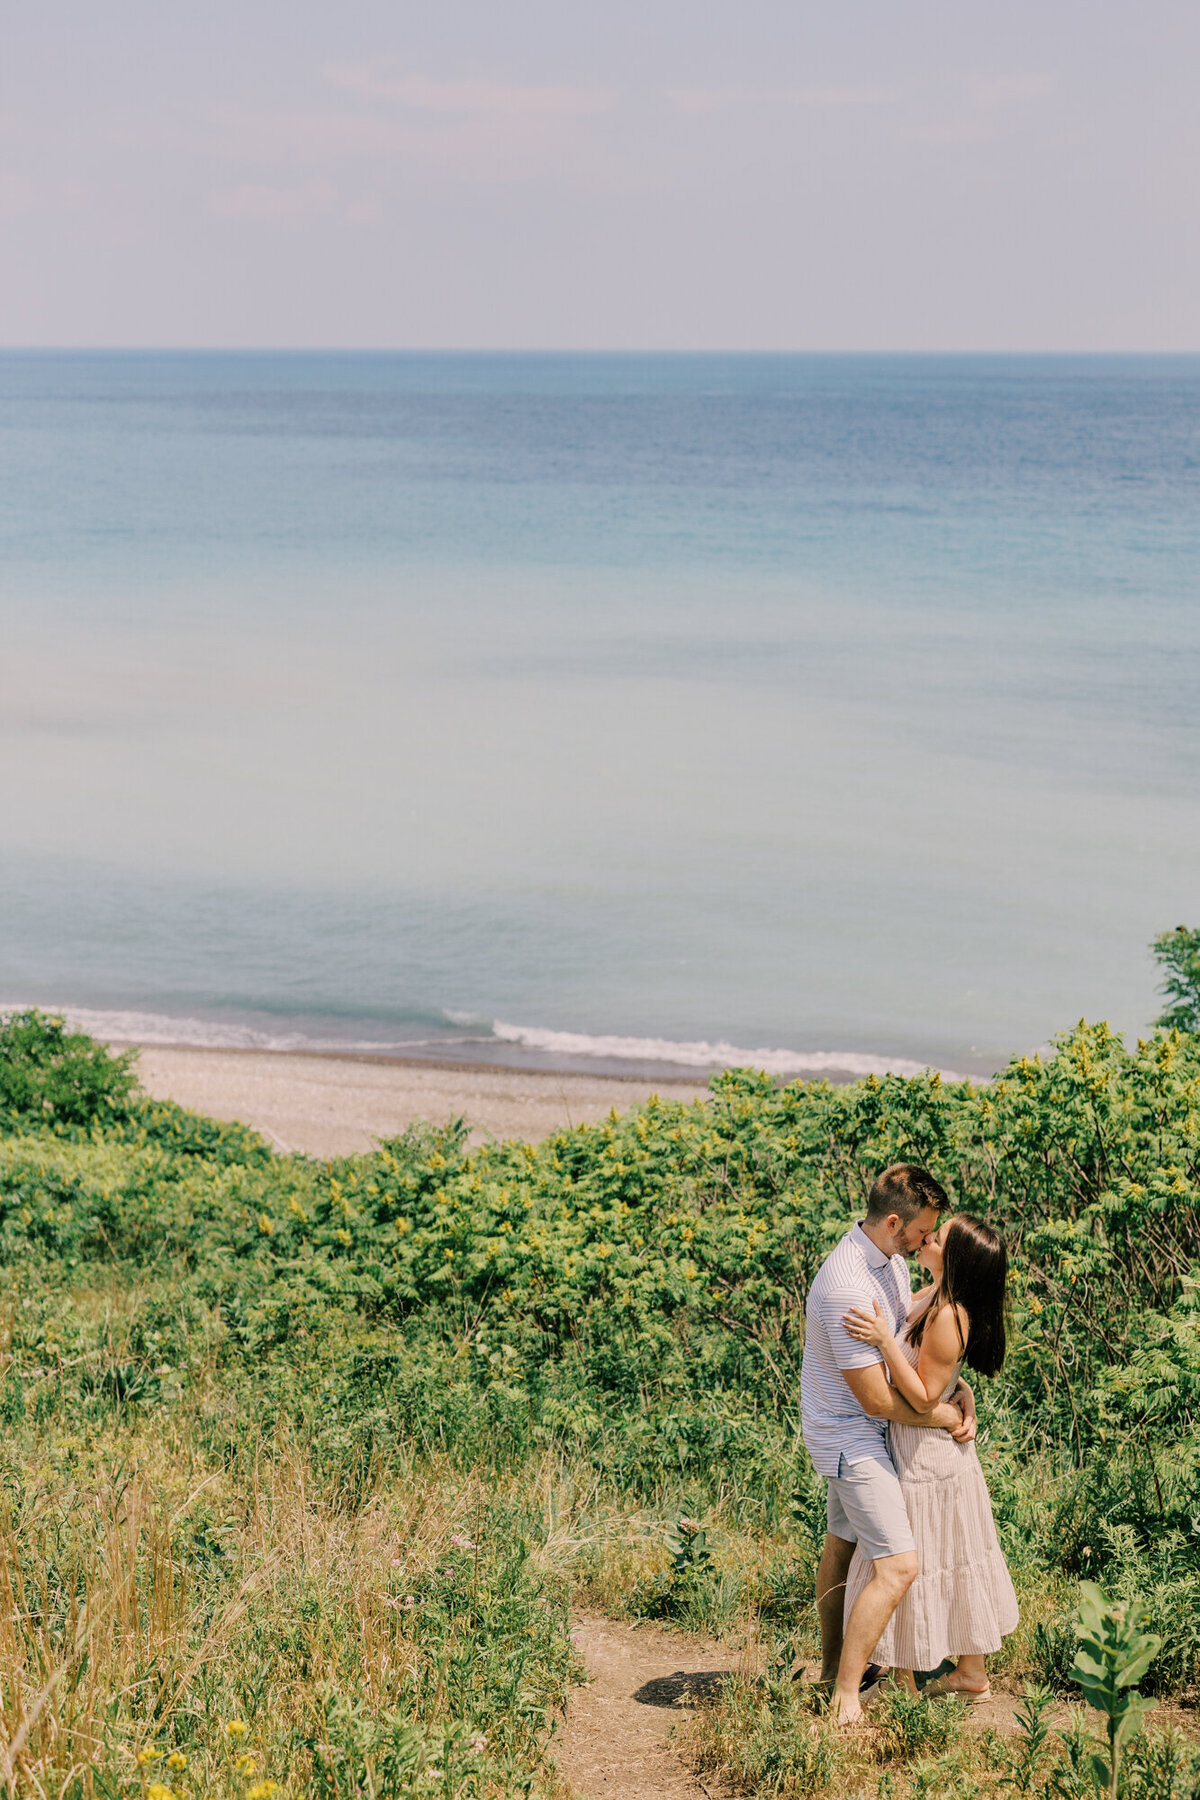 A couple kiss with the beautiful Lake Michigan in the background